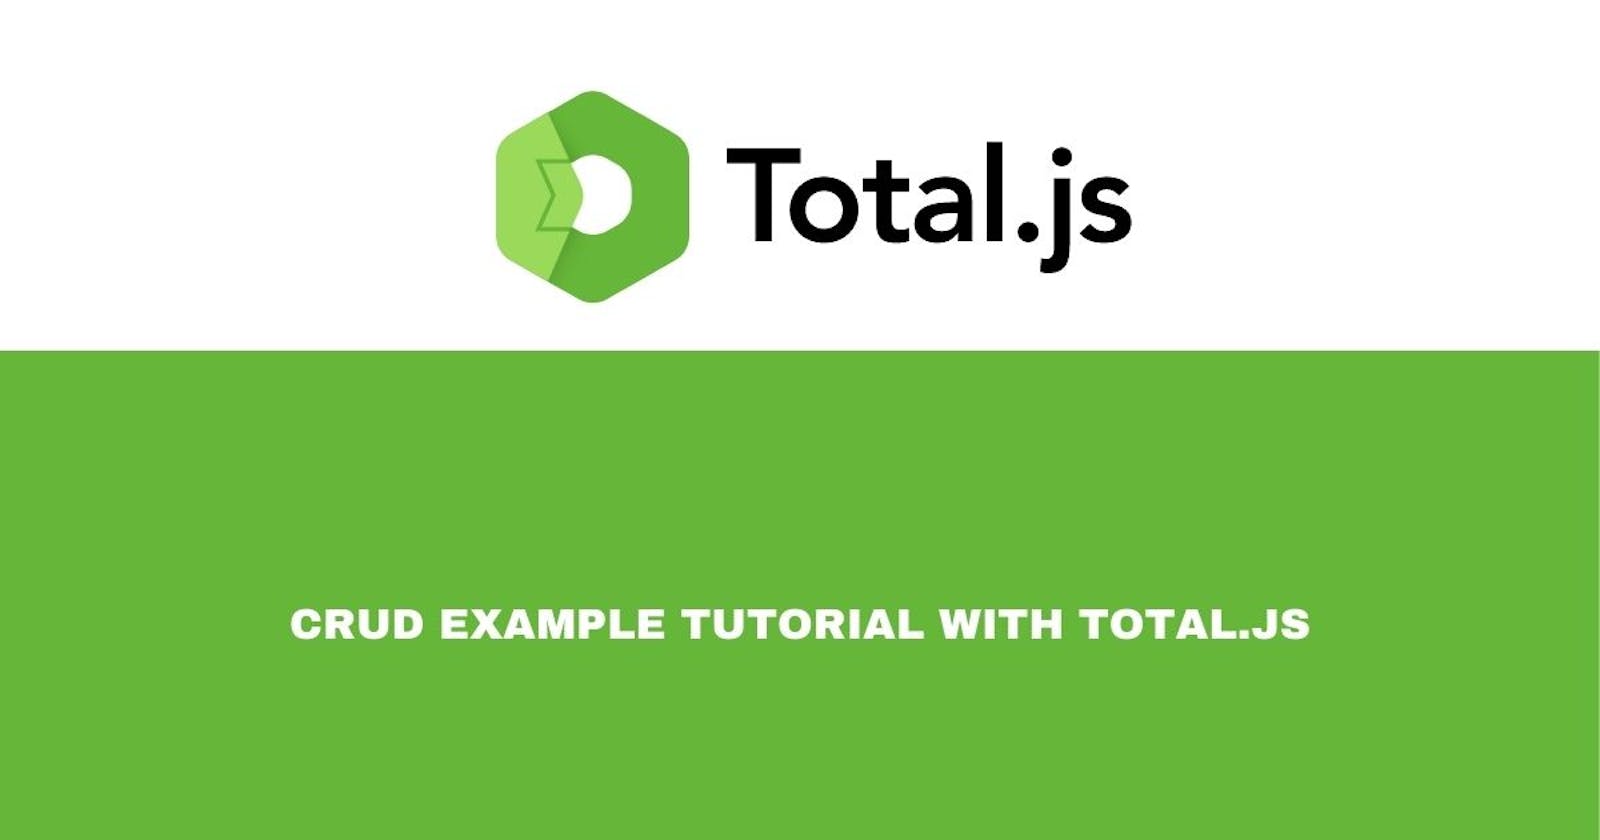 Blog post tutorial with total.js